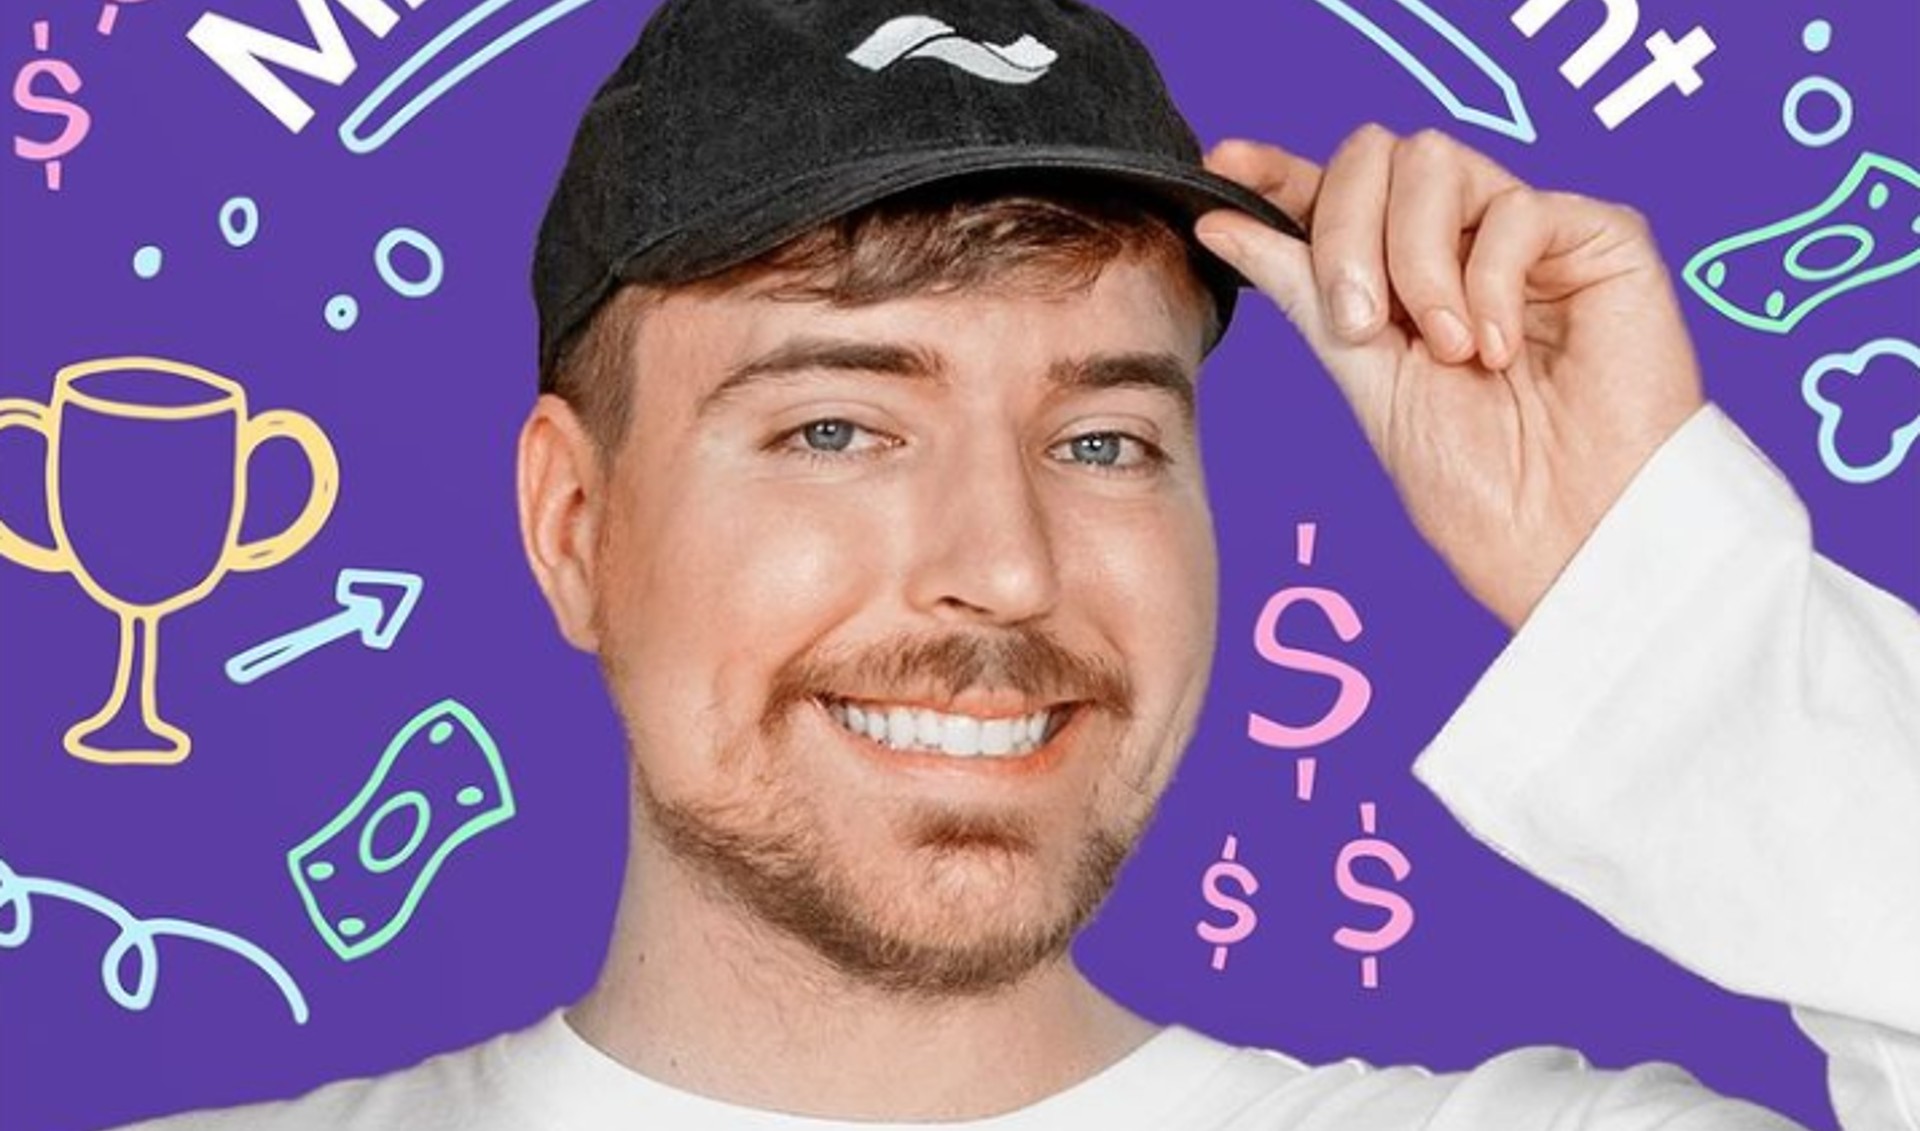 MrBeast Builds On Relationship With Banking Company 'Current' - Tubefilter